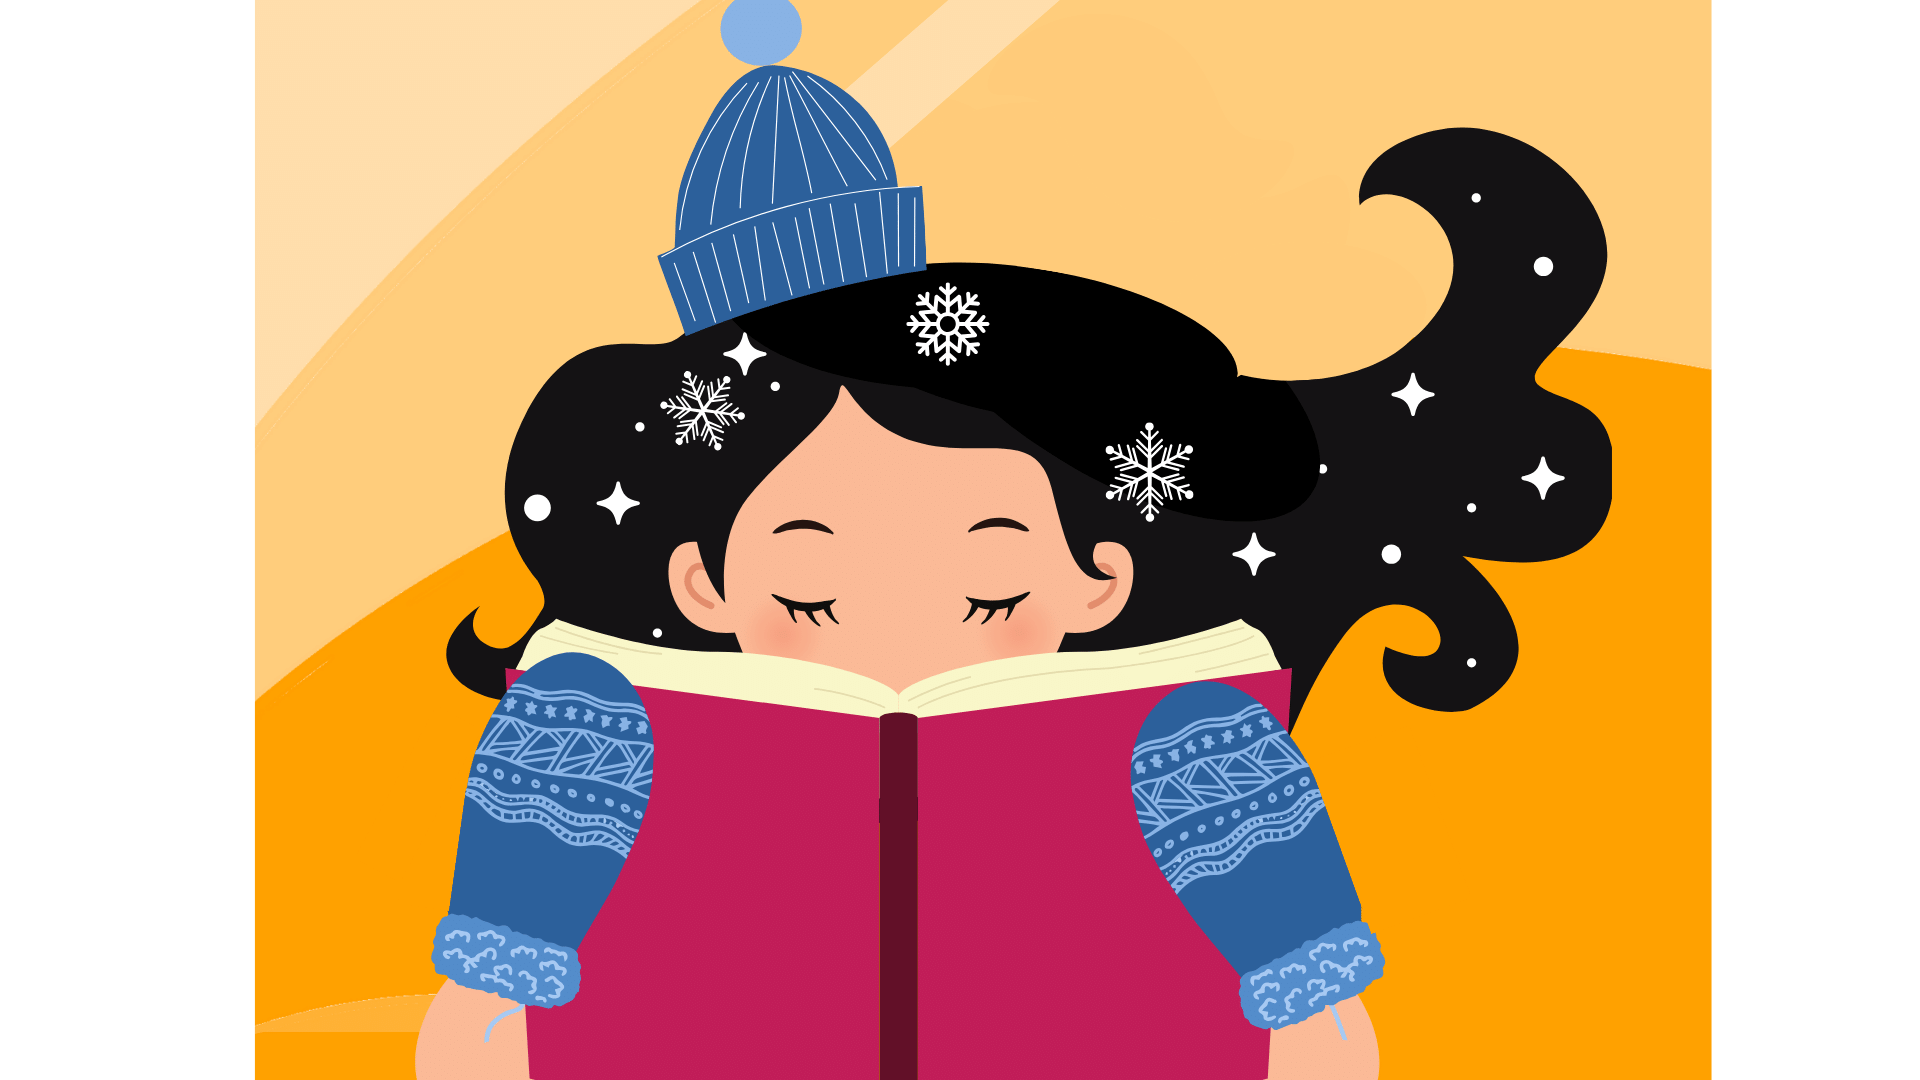 A girl wearing mittens enjoys a book as snowflakes fall